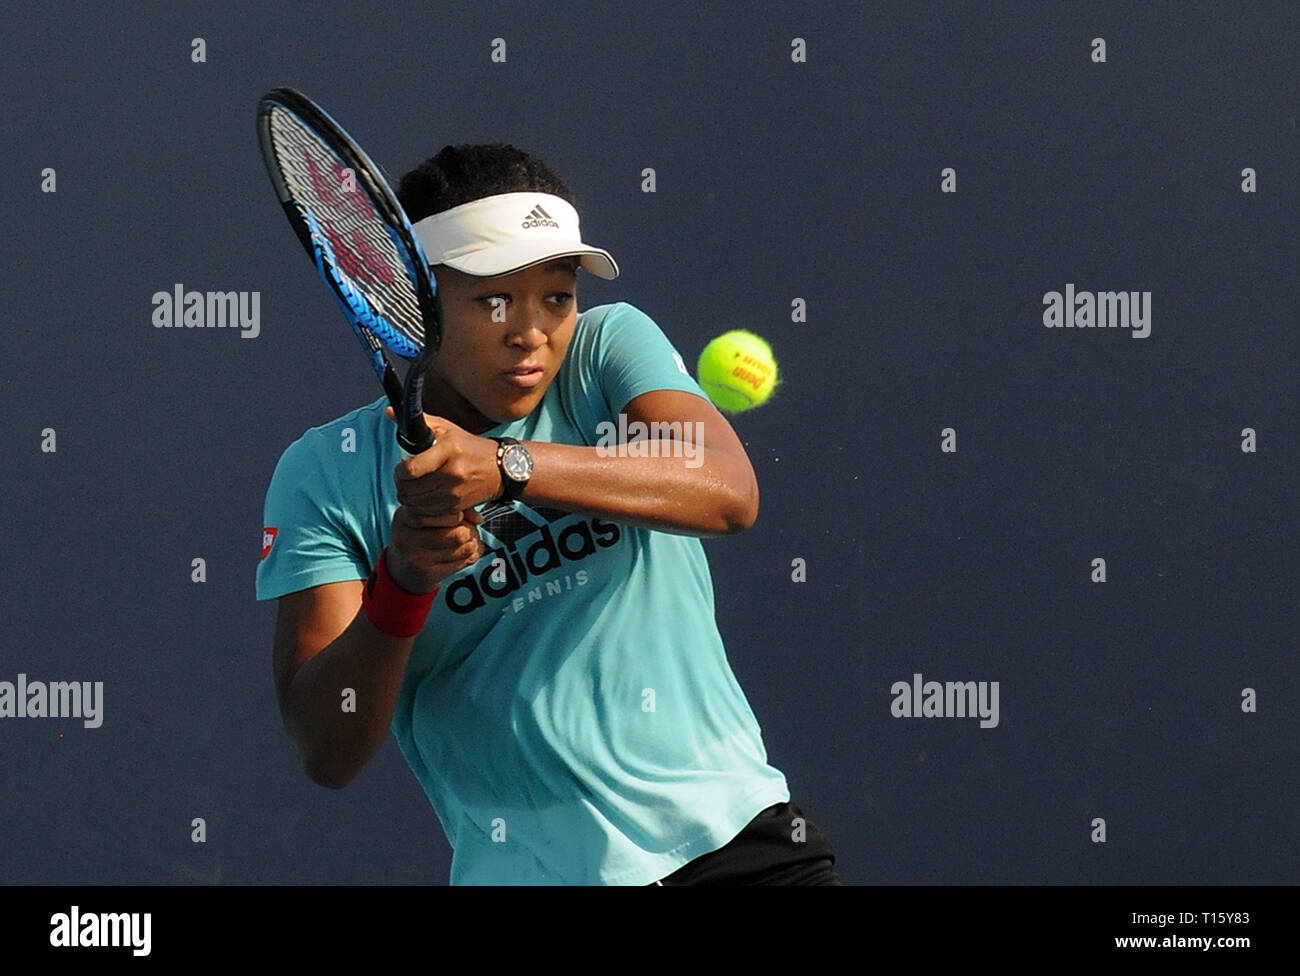 Miami, USA. 21st Mar, 2019.  Naomi Osaka of Japan plays on a practice court at the Hard Rock Stadium at the Miami Open on March 21, 2019 in Miami Gardens, Florida. (Paul Hennessy/Alamy) Credit: Paul Hennessy/Alamy Live News Stock Photo